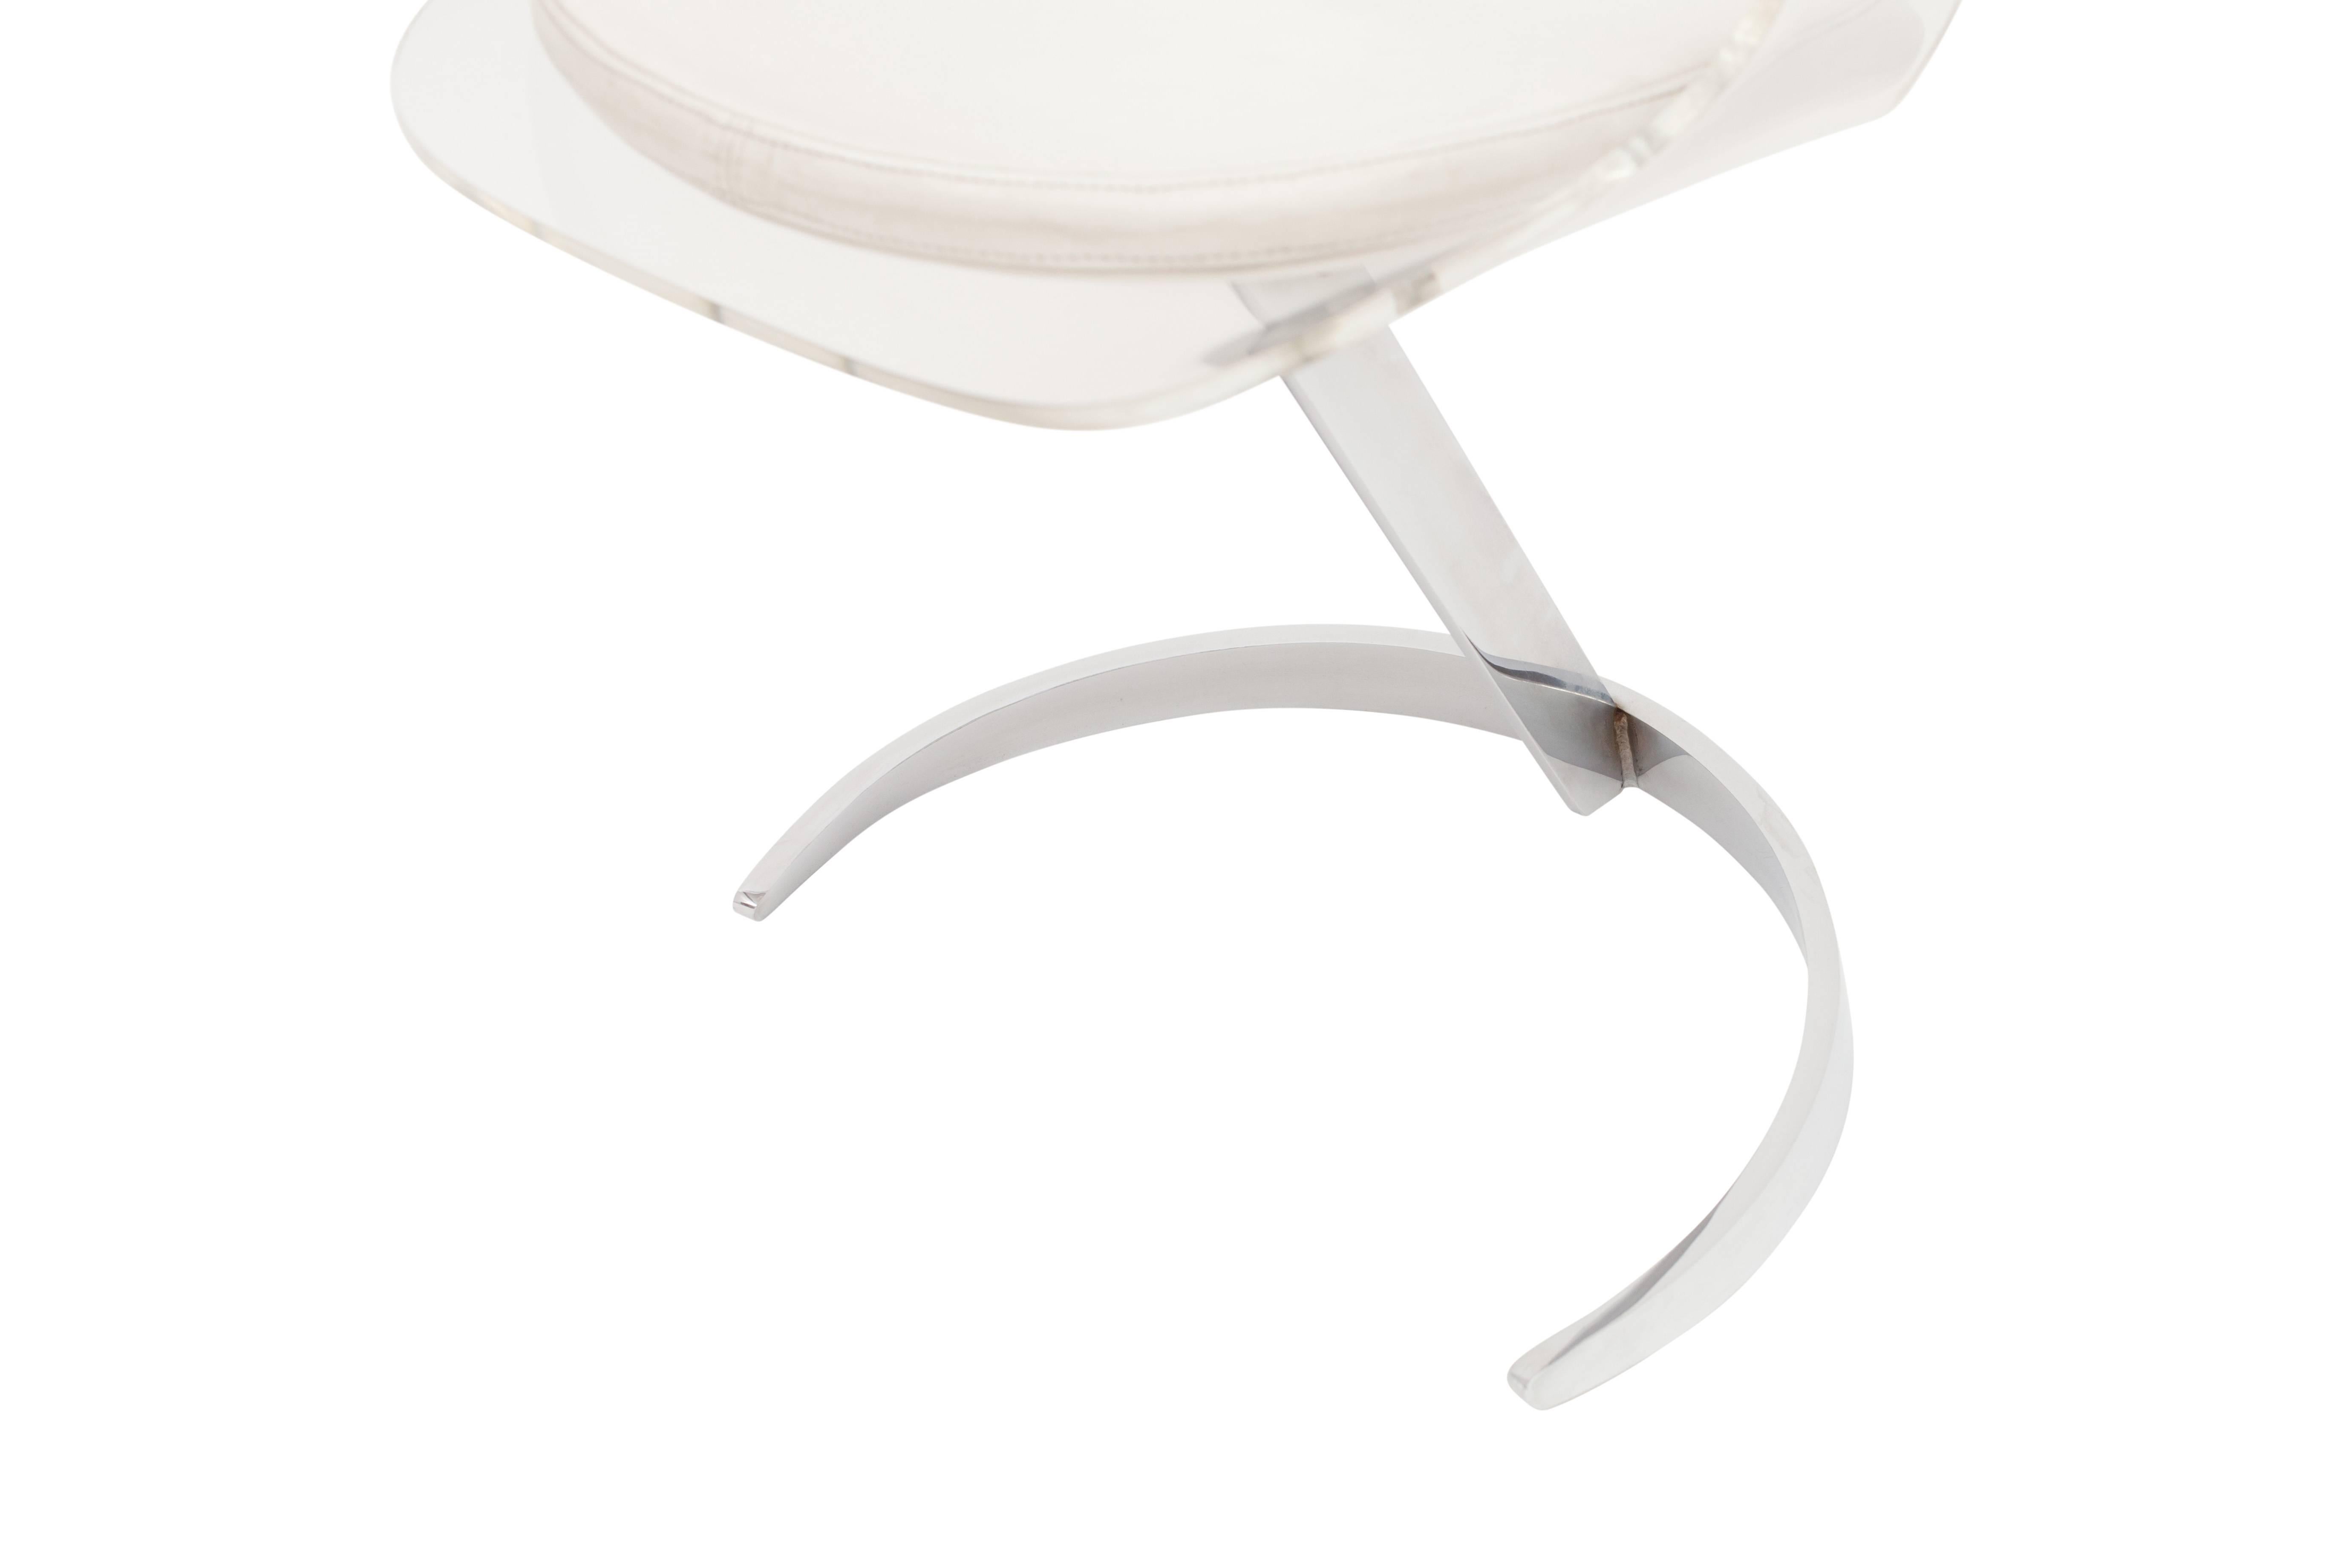 French Boris Tabacoff Perspex Chair White Leather and Chrome